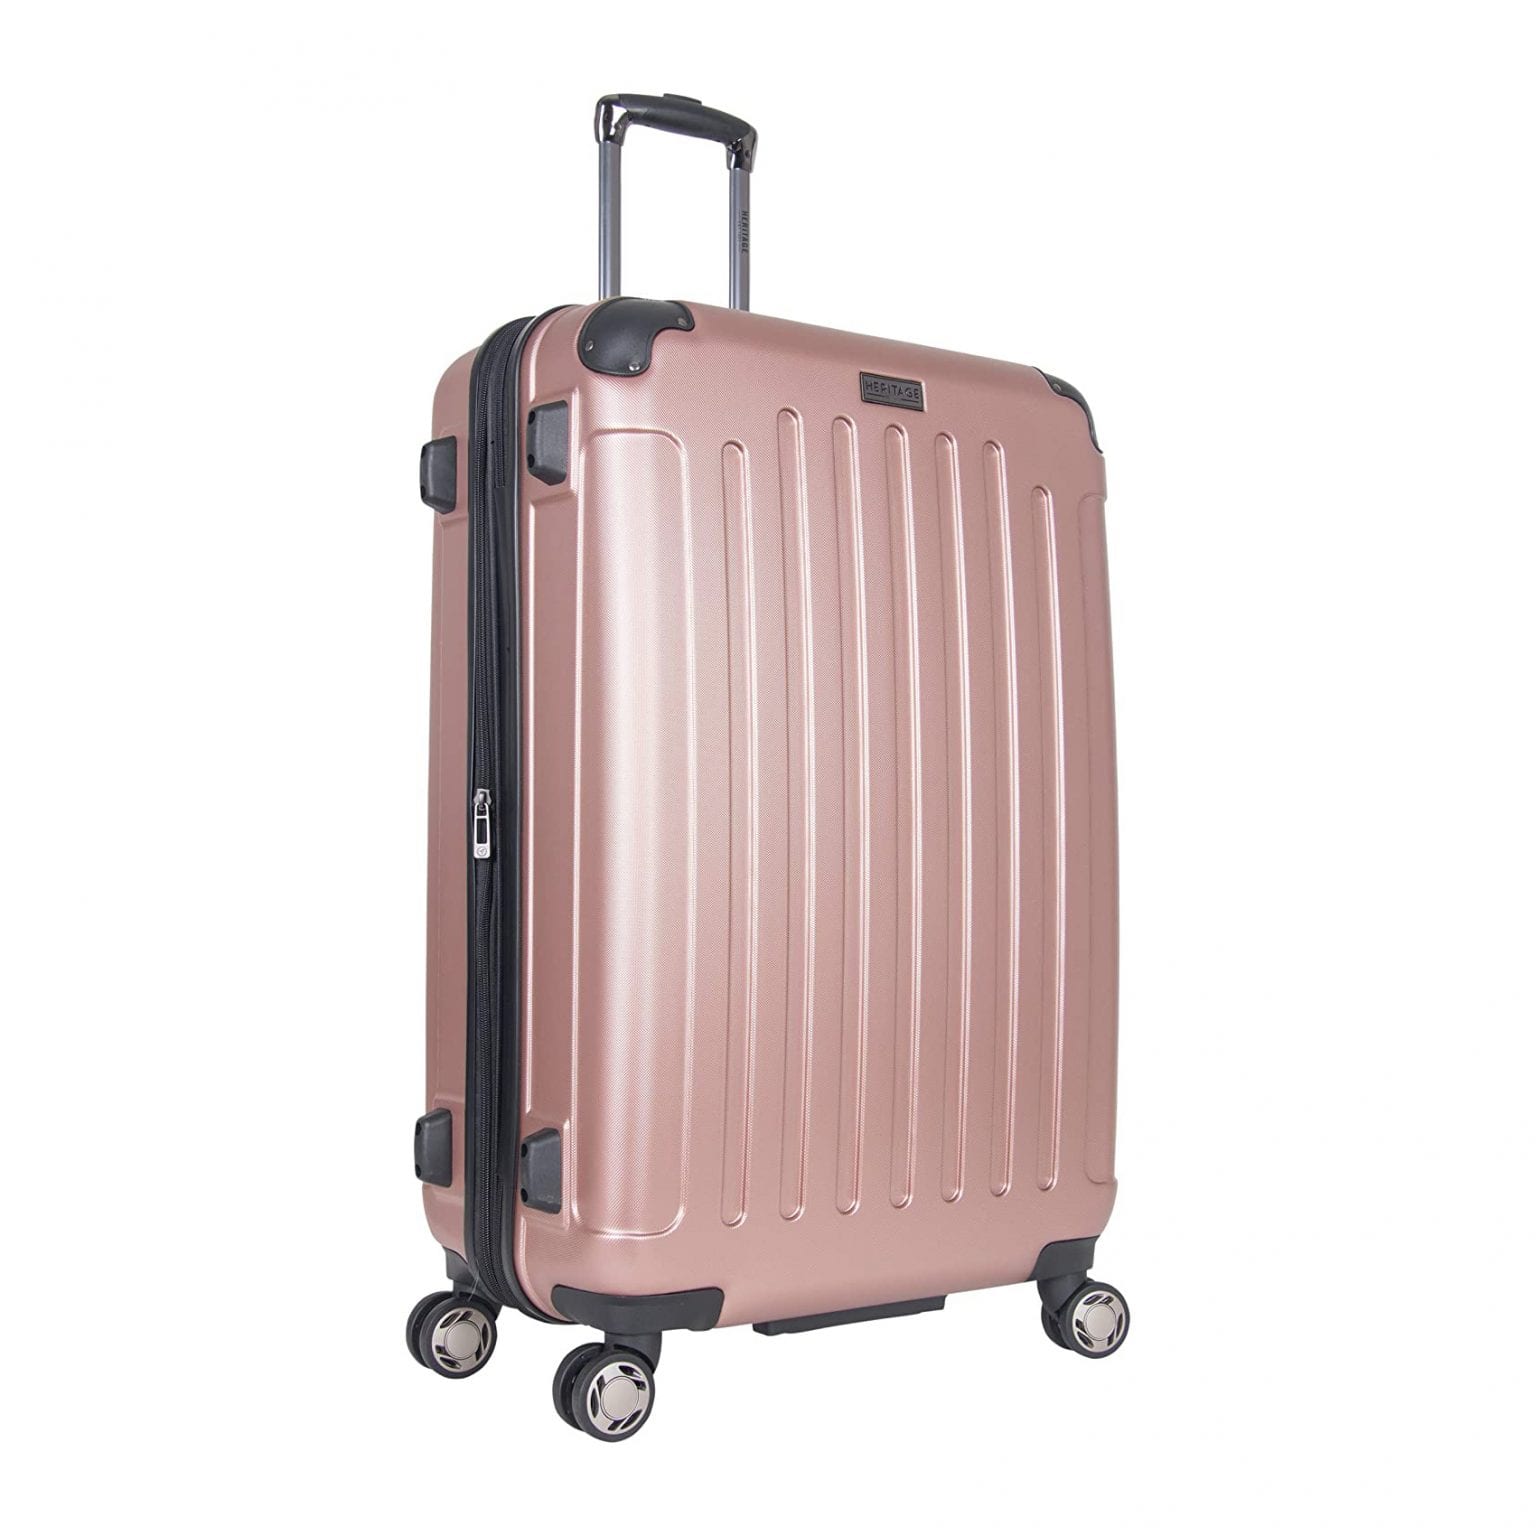 Top 10 Best Rose Gold Luggage in 2022 | Rose Gold Suitcase